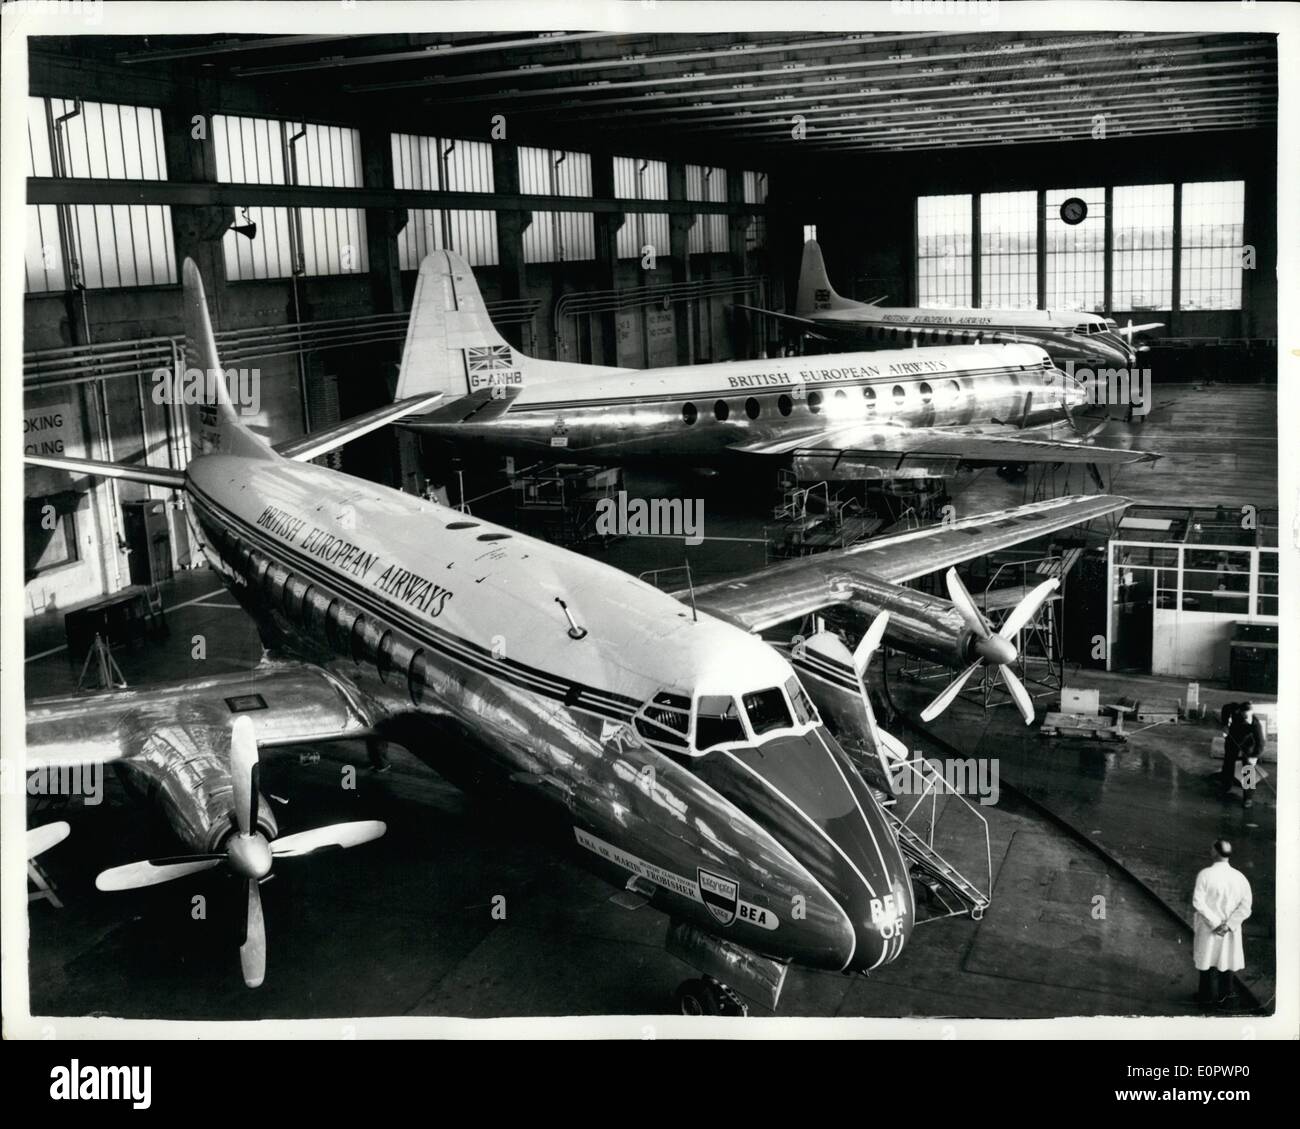 Mar. 03, 1957 - New Bolts For Viscounts: A Viscount airliner will be used as a ''guinea pig'' to investigate the bolt fatigue which brought about the Manchester Airport crash last week. Vickers are determined to make absolutely sure that their world-beating plane will be 100 percent safe in future. The first step has been to replace every wing flap bolt in every Viscount which could possibly be in danger. Photo shows A Viscount aircraft having new bolts fitted, after the Ringway crash last week. Stock Photo